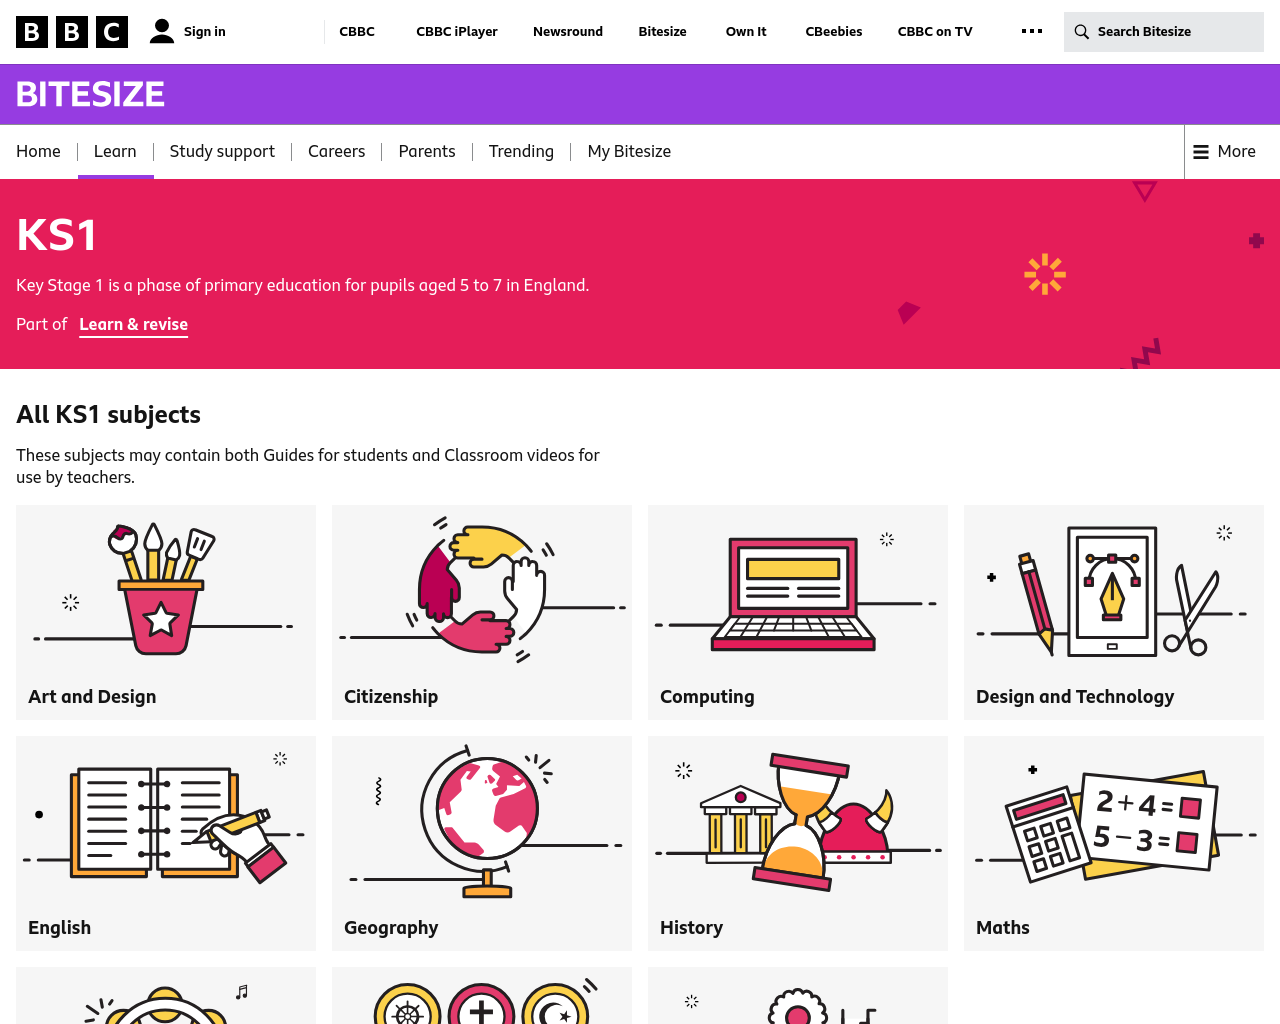 BBC Bitesize resources for Literacy, Numeracy and Science